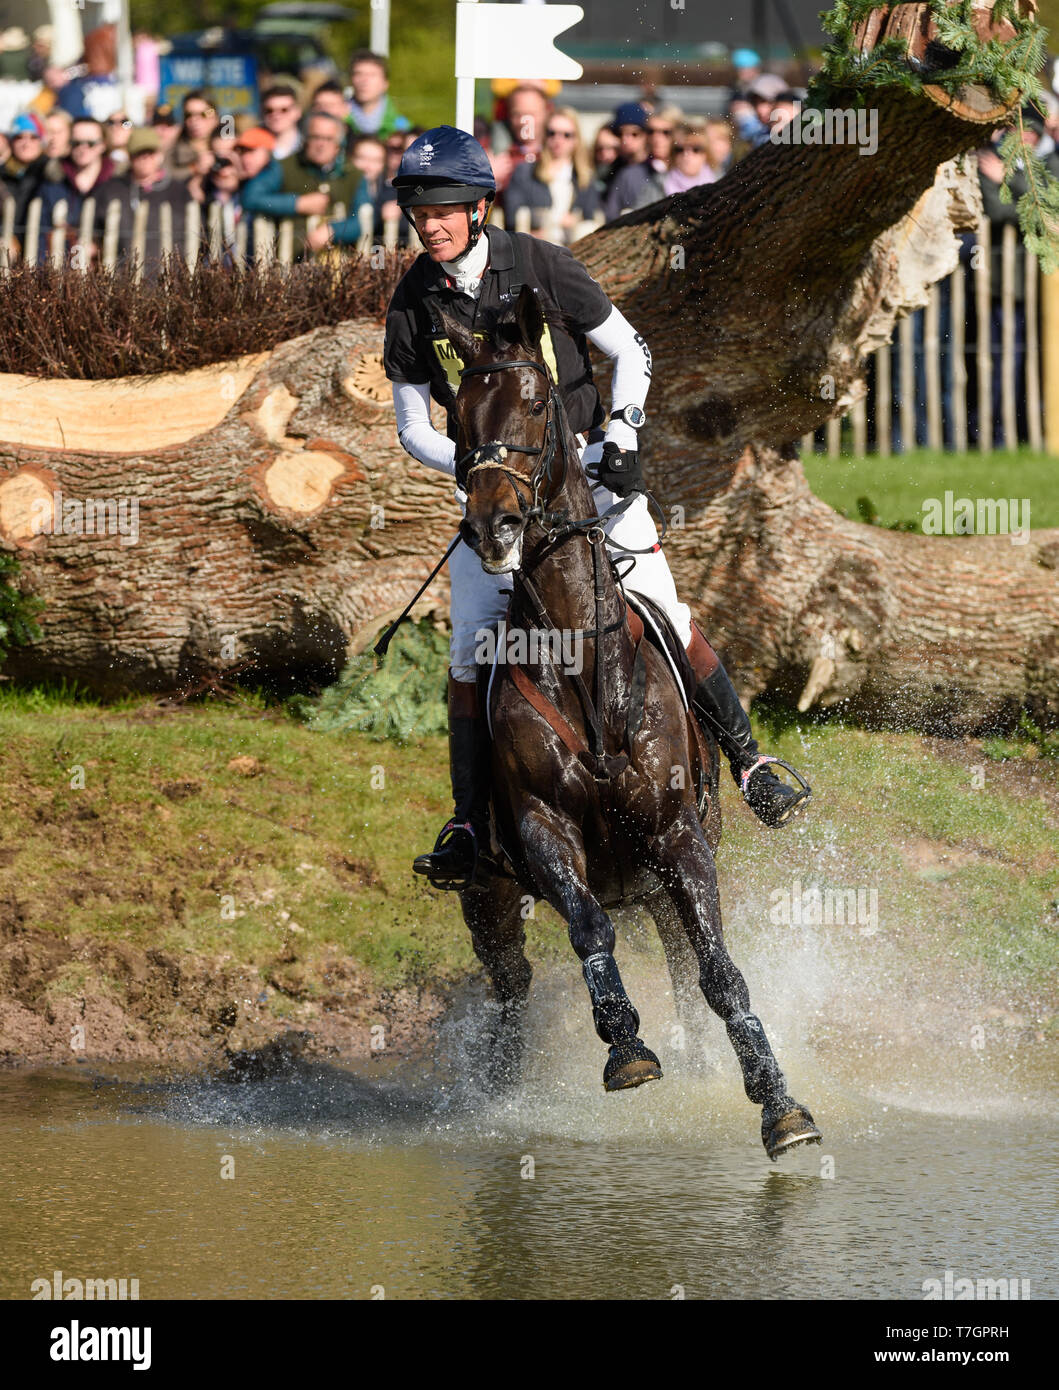 William Fox-Pitt and ORATORIO during the cross country phase of the Mitsubishi Motors Badminton Horse Trials, May 2019 Stock Photo